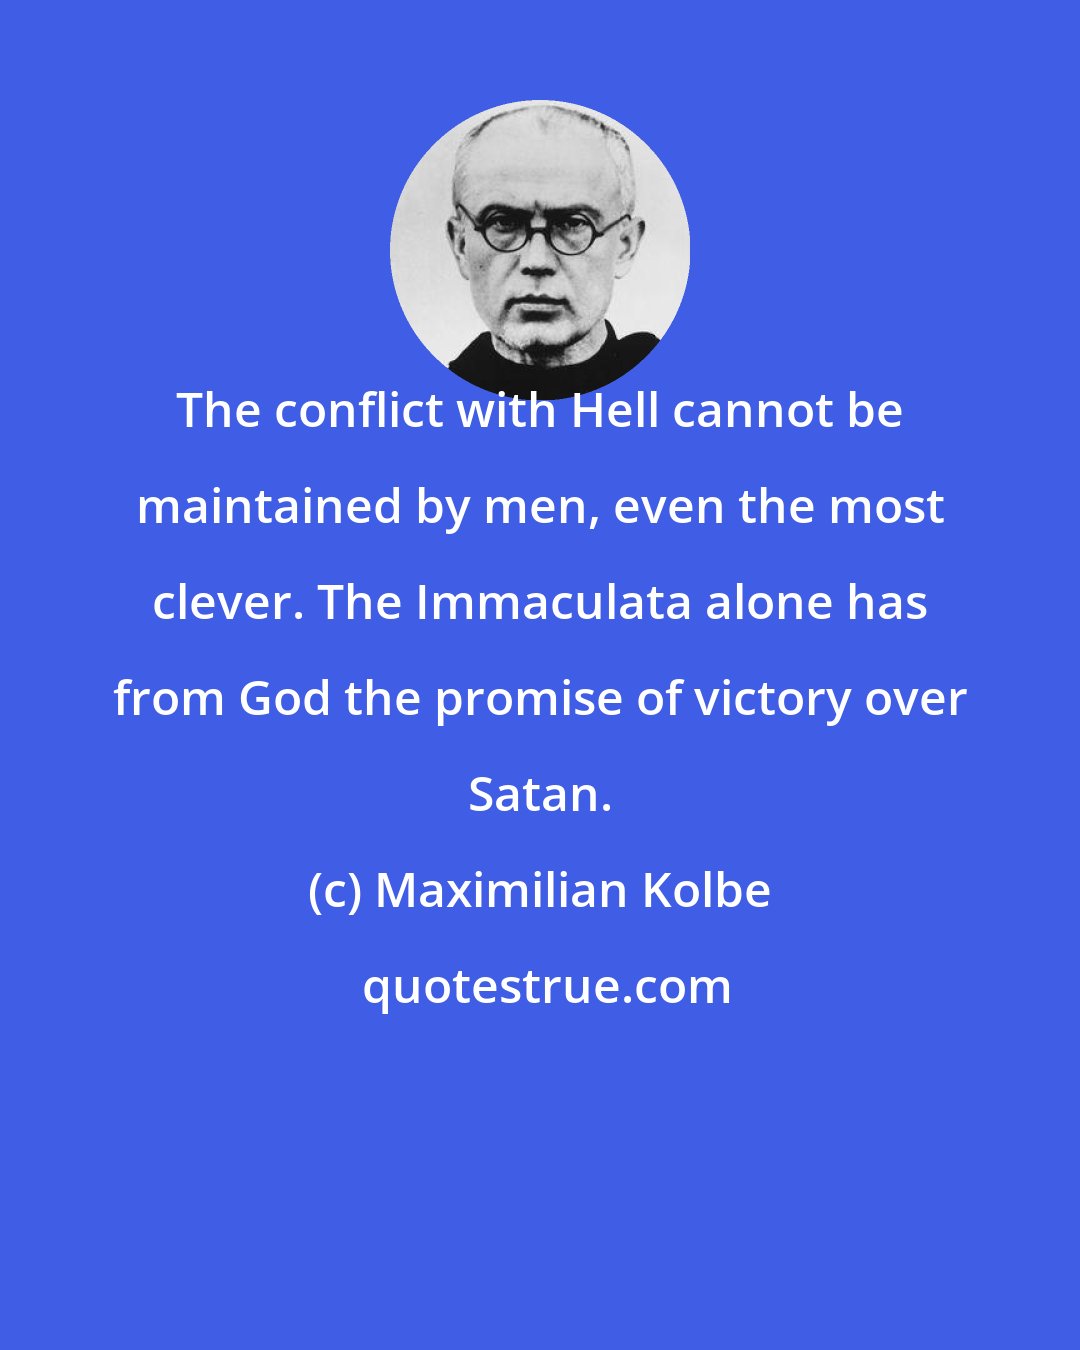 Maximilian Kolbe: The conflict with Hell cannot be maintained by men, even the most clever. The Immaculata alone has from God the promise of victory over Satan.